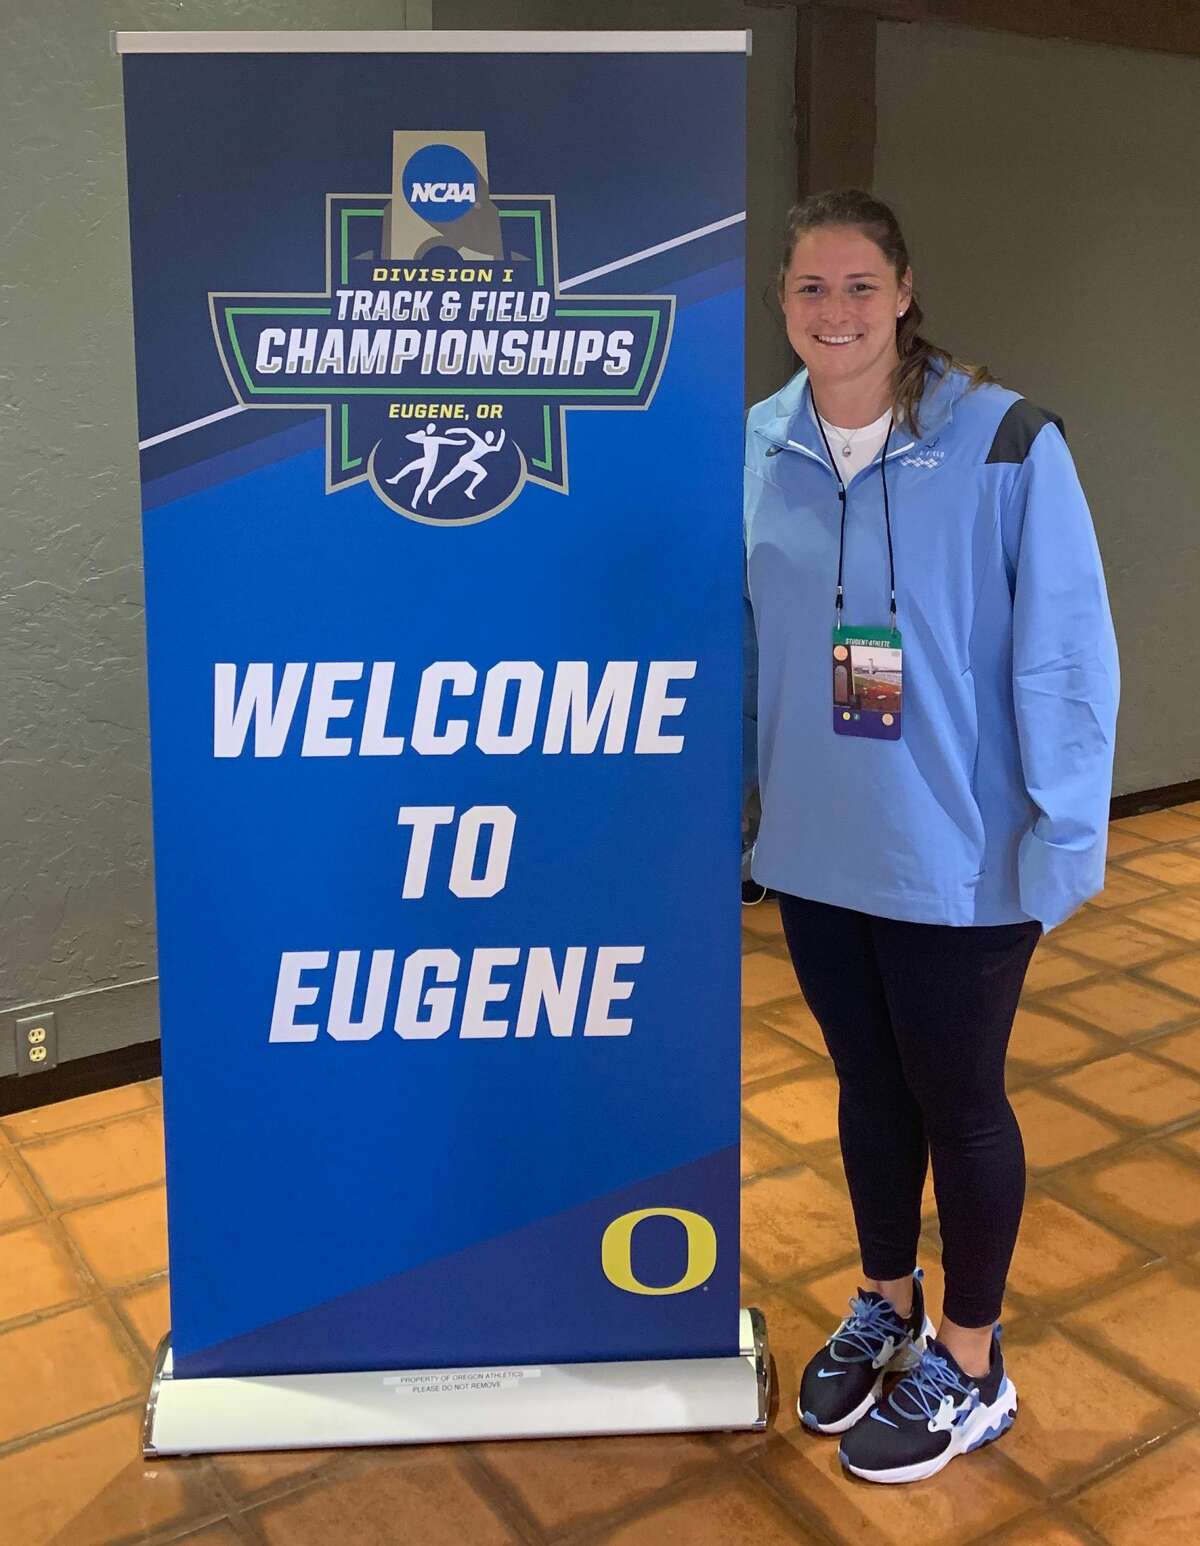 Jill Shippee at the Track and Field Championships in Eugene, Oregon. (Photo courtesy of UNC media relations)